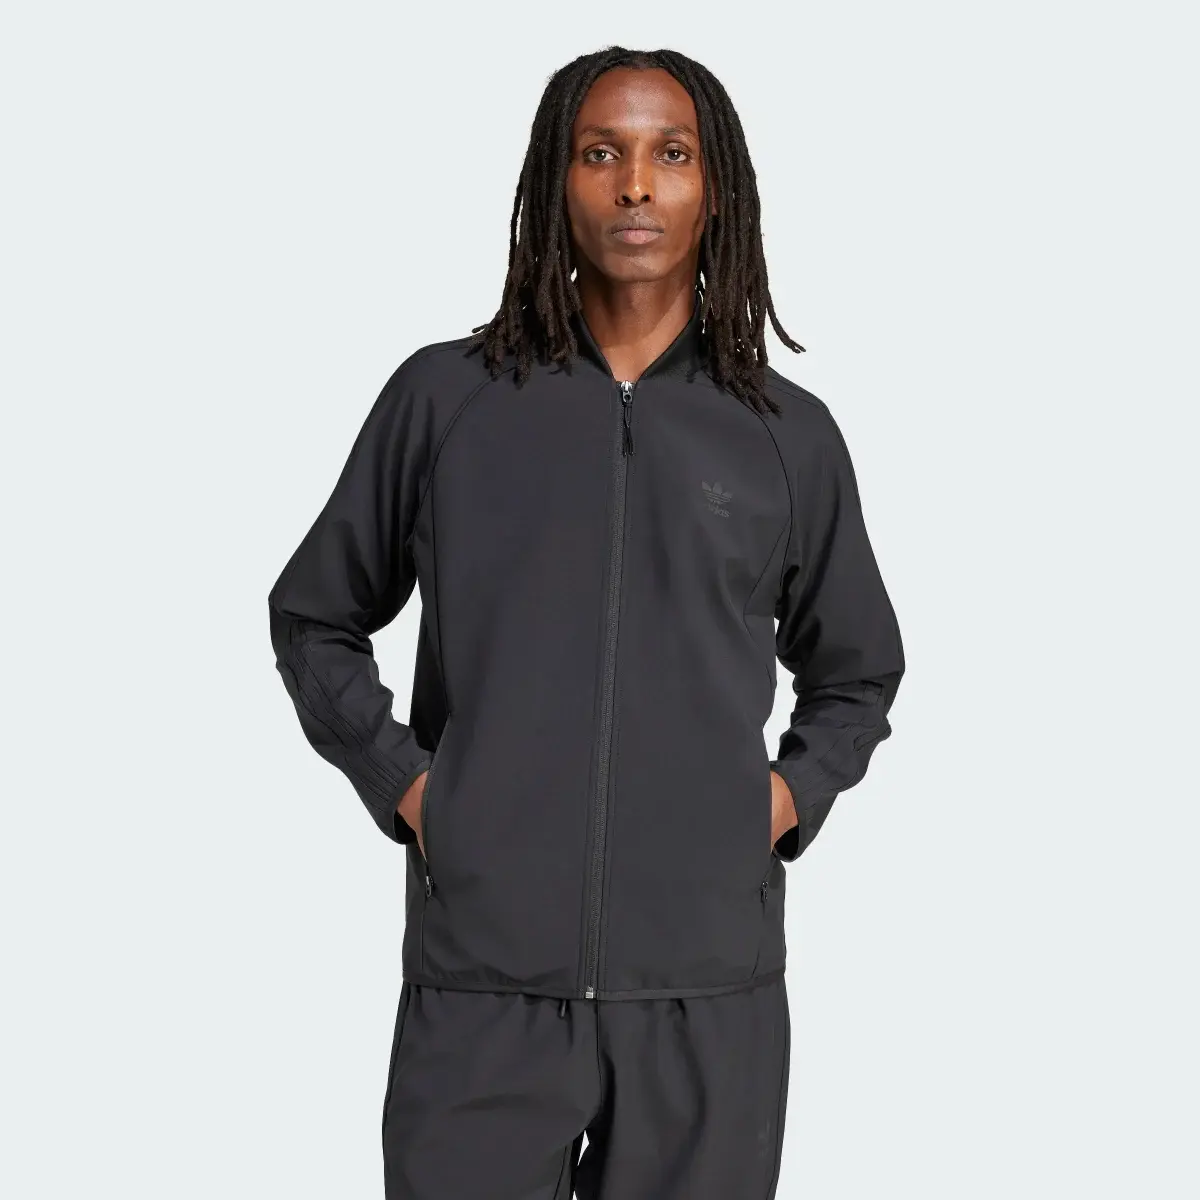 Adidas SST Bonded Track Top. 2